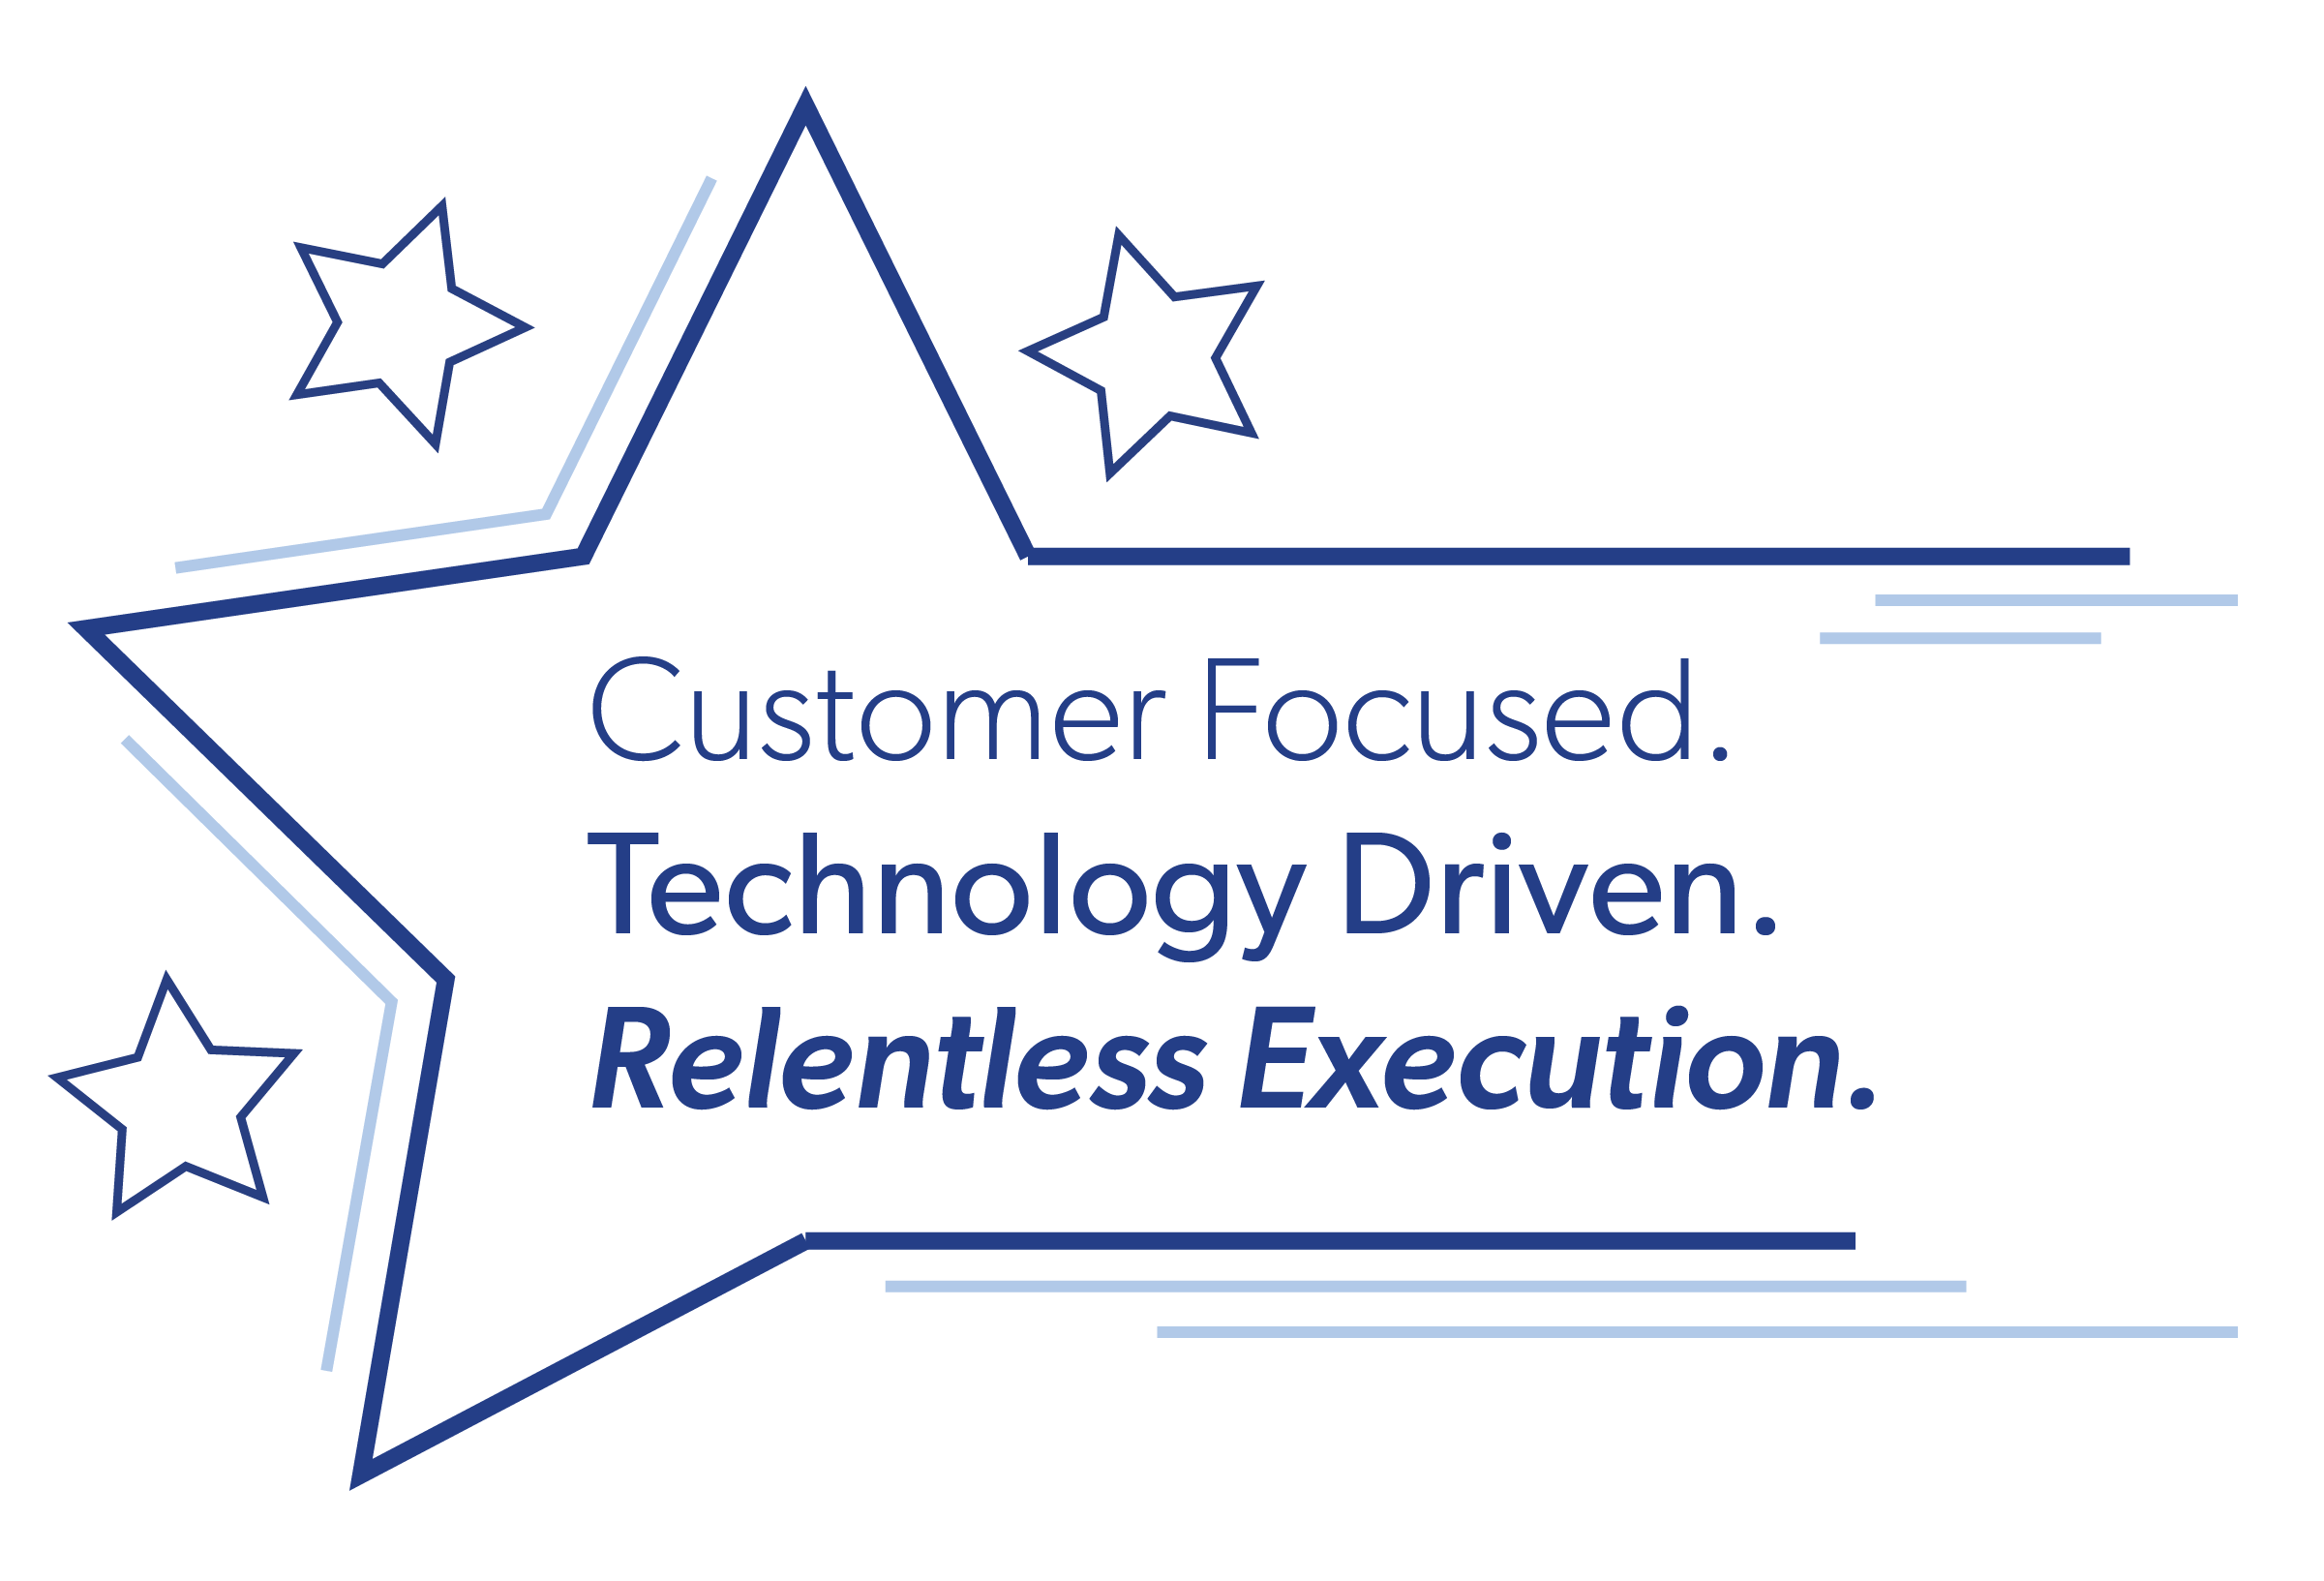 Customer Focused. Technology Driven. Relentless Execution.